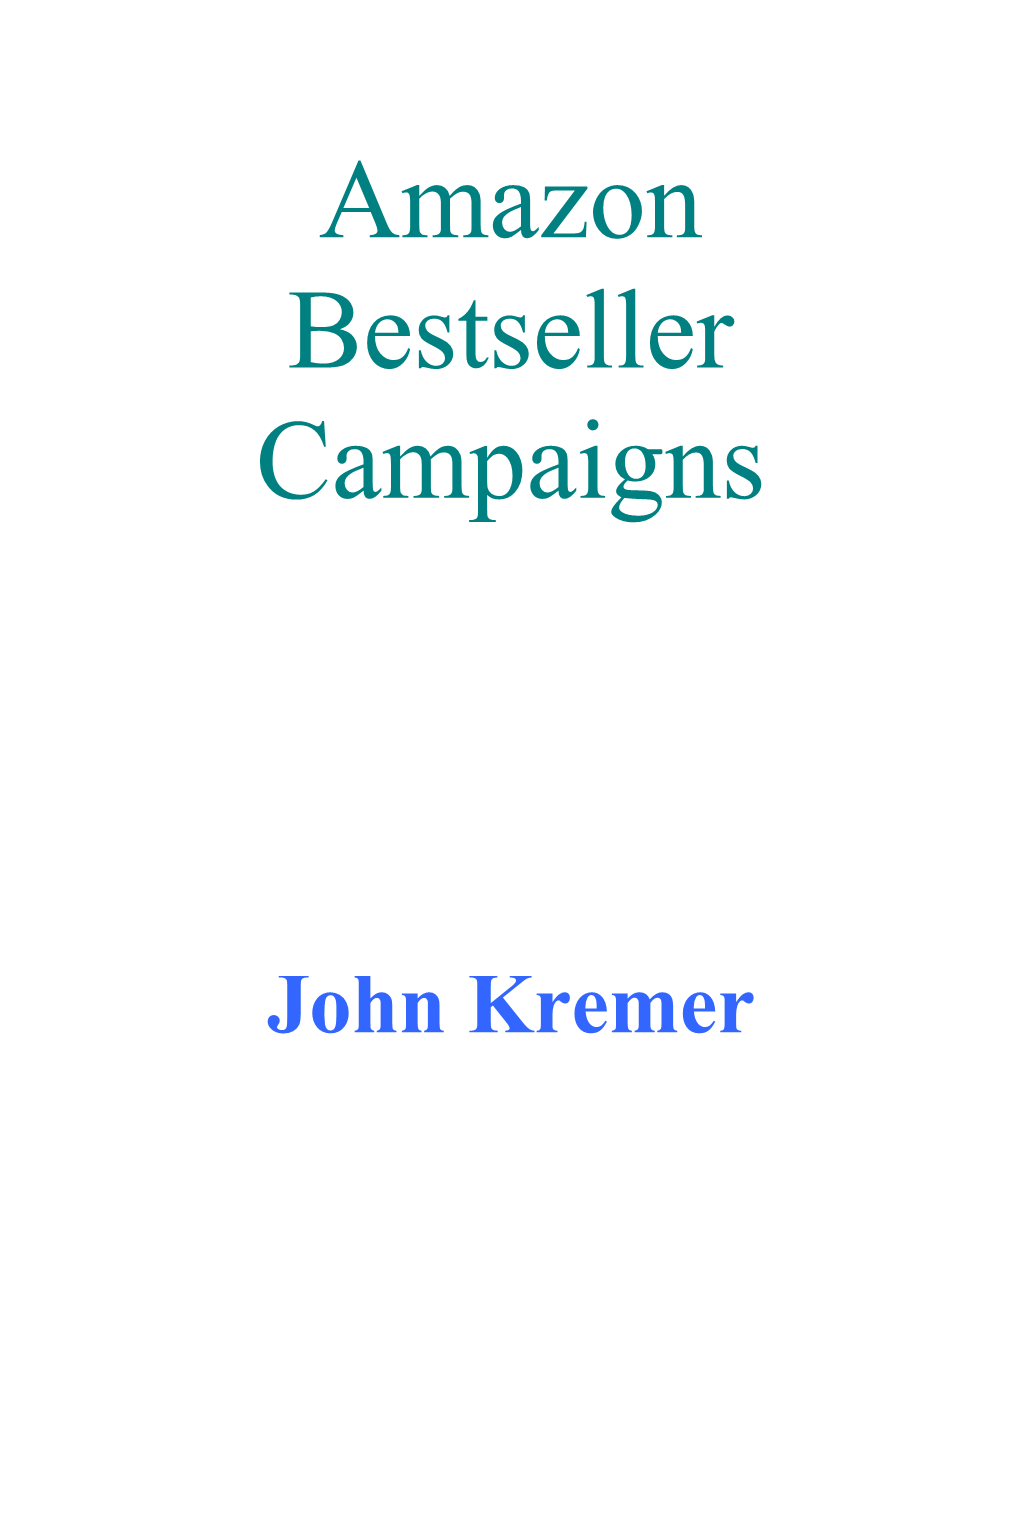 Amazon Bestseller Campaigns